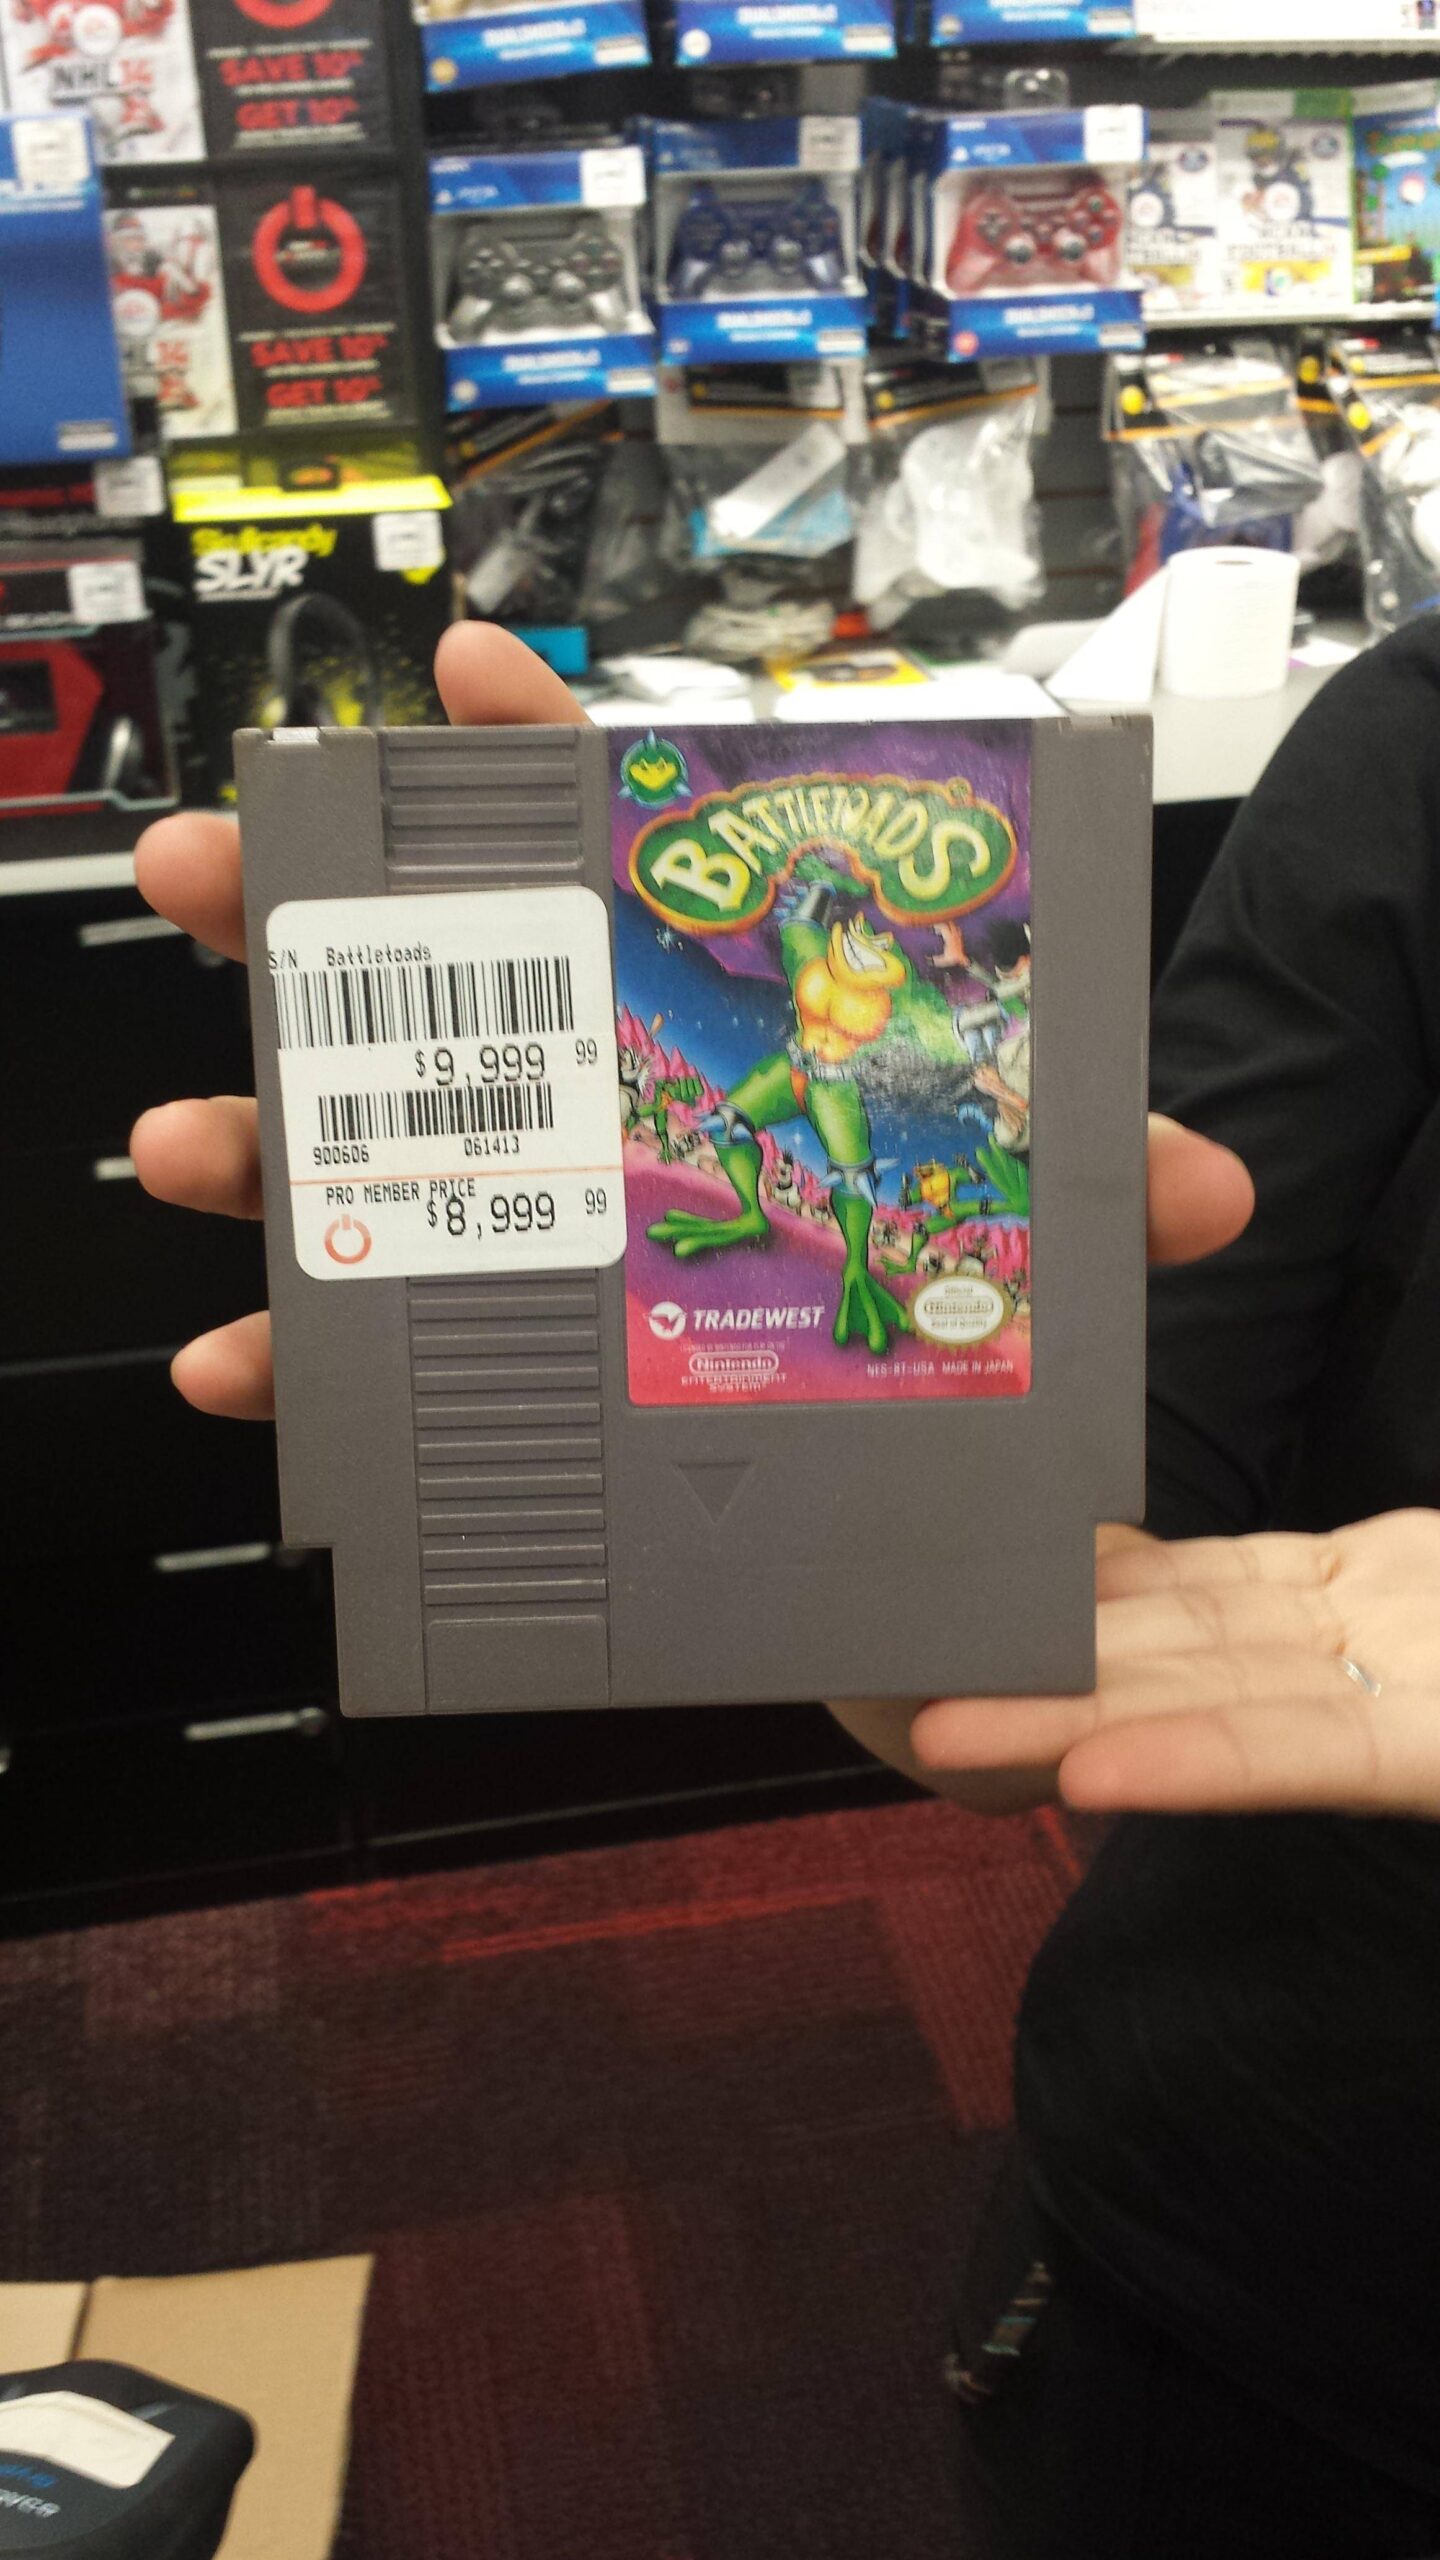 Battletoads Gamestop Pranks by 4chan from the mid 00’s